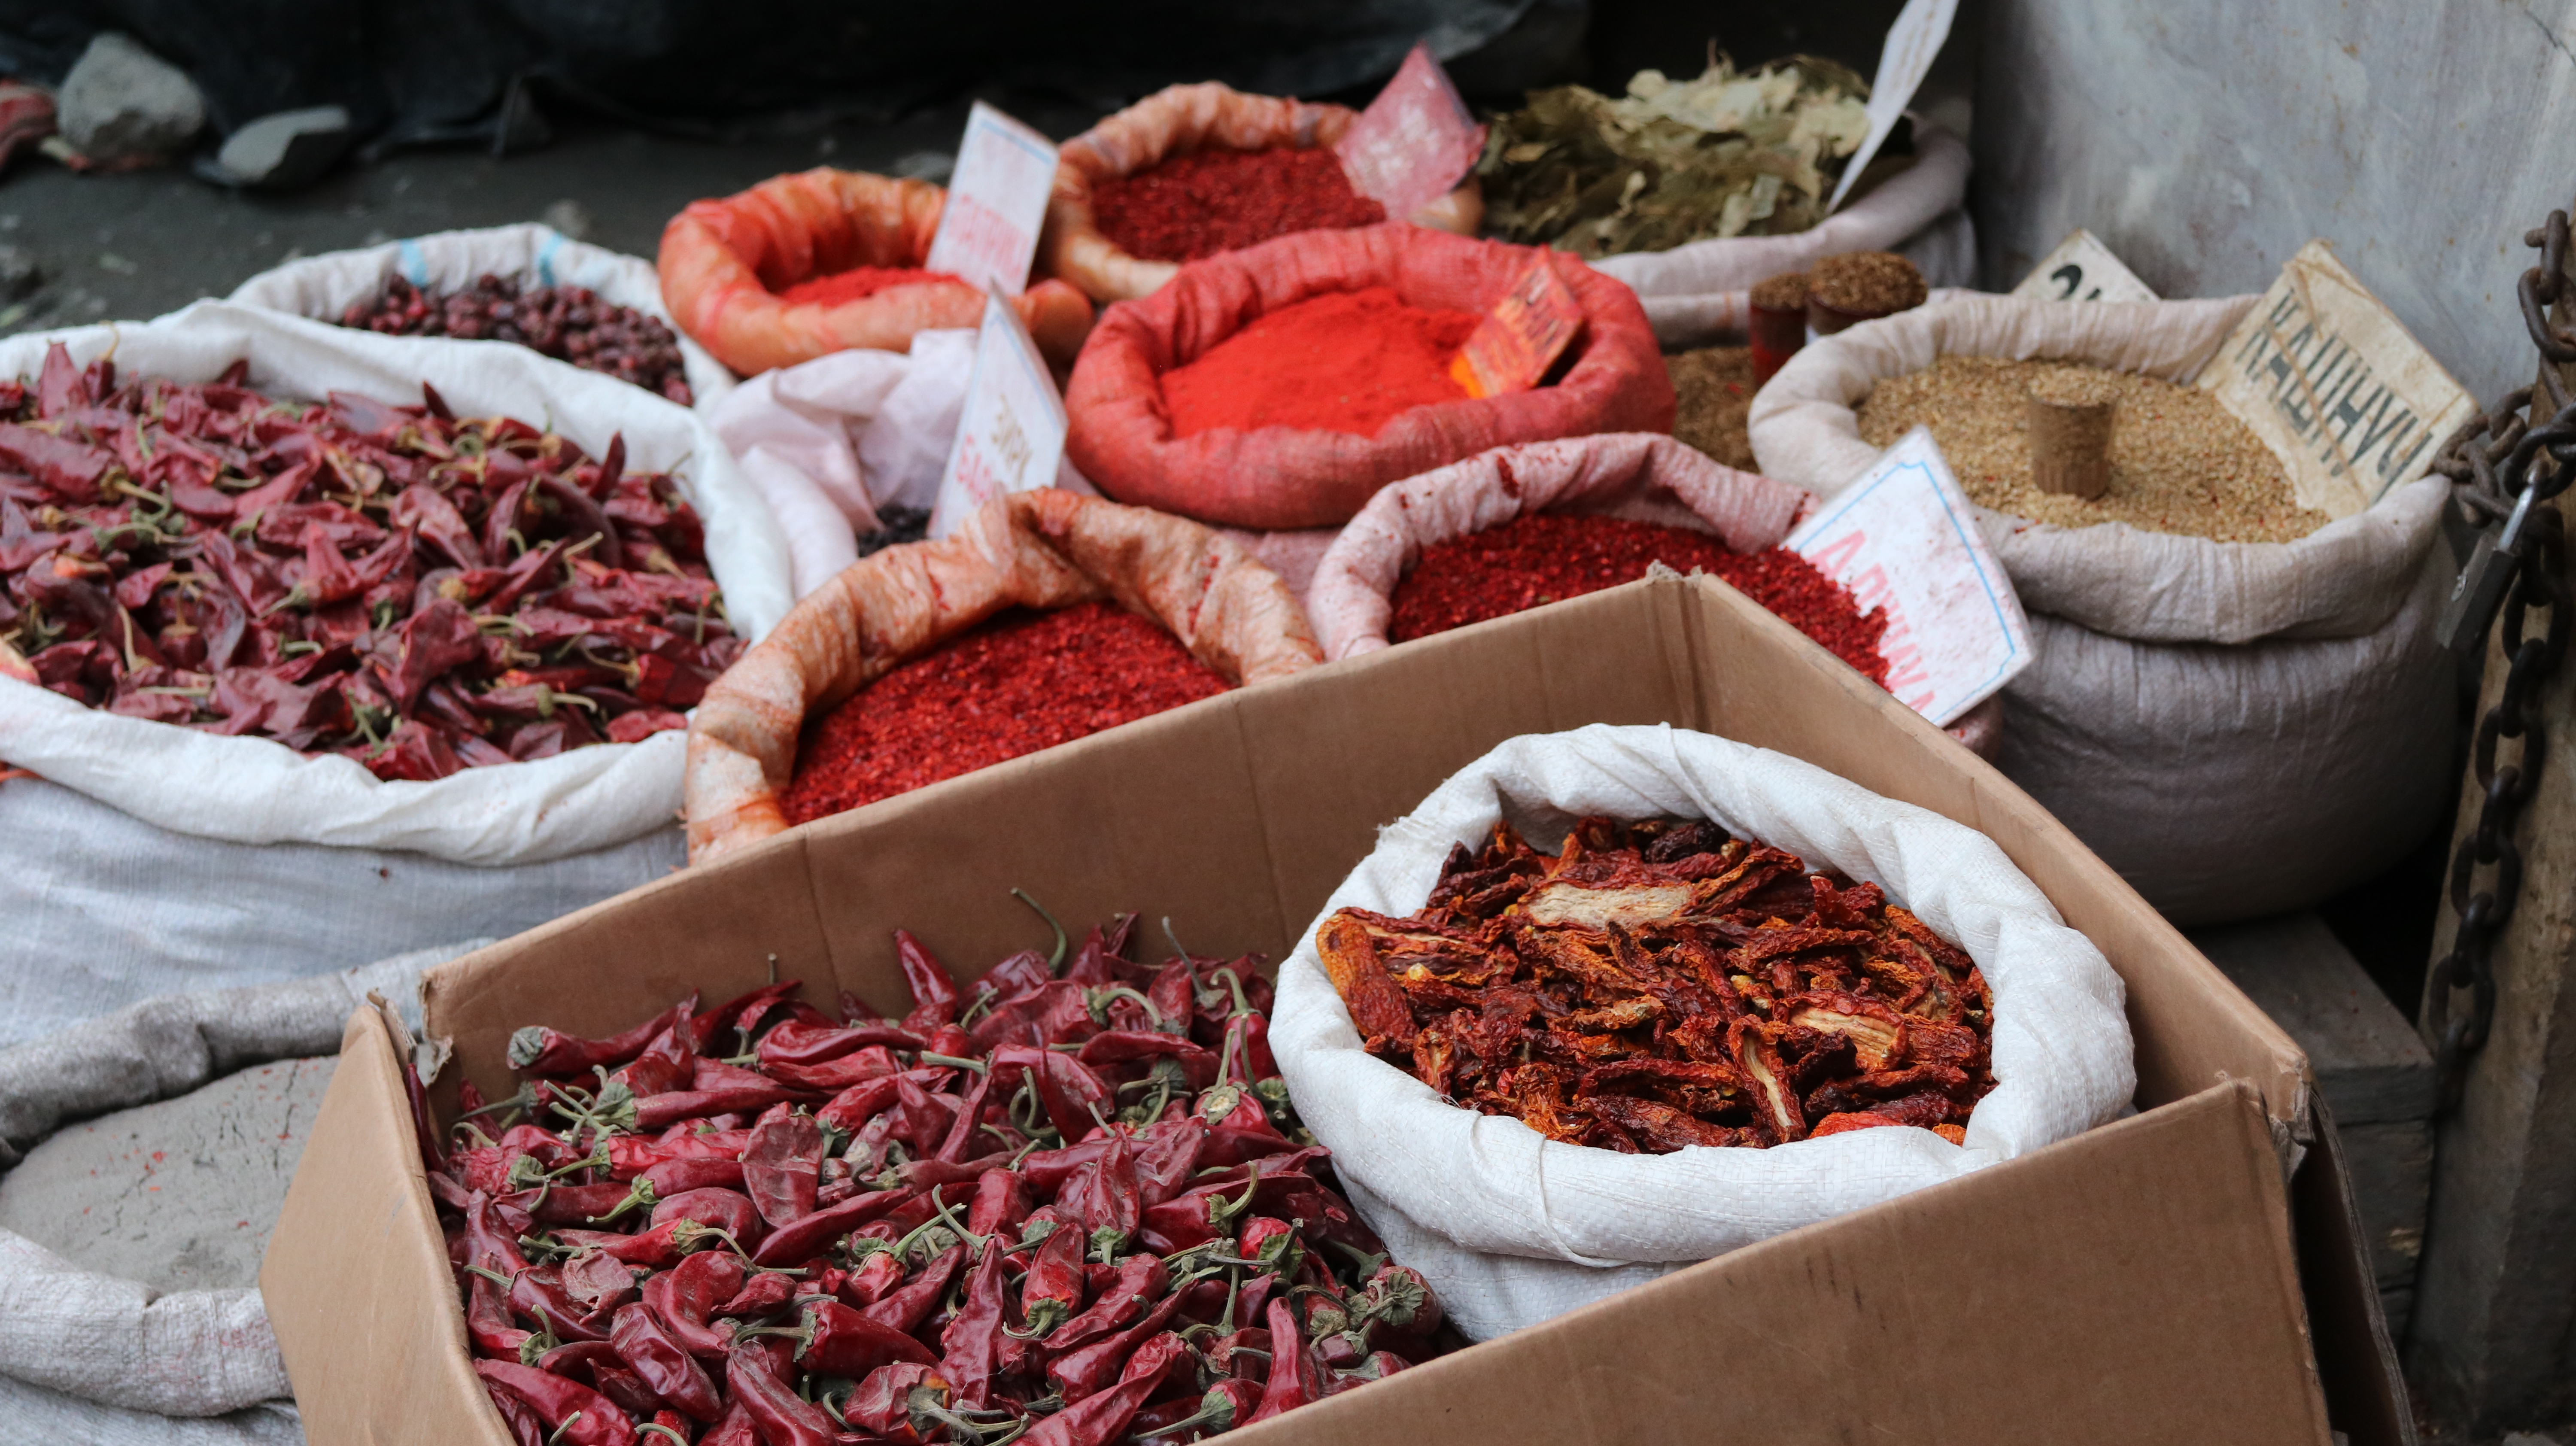 Chile's and spices at the Bazar.